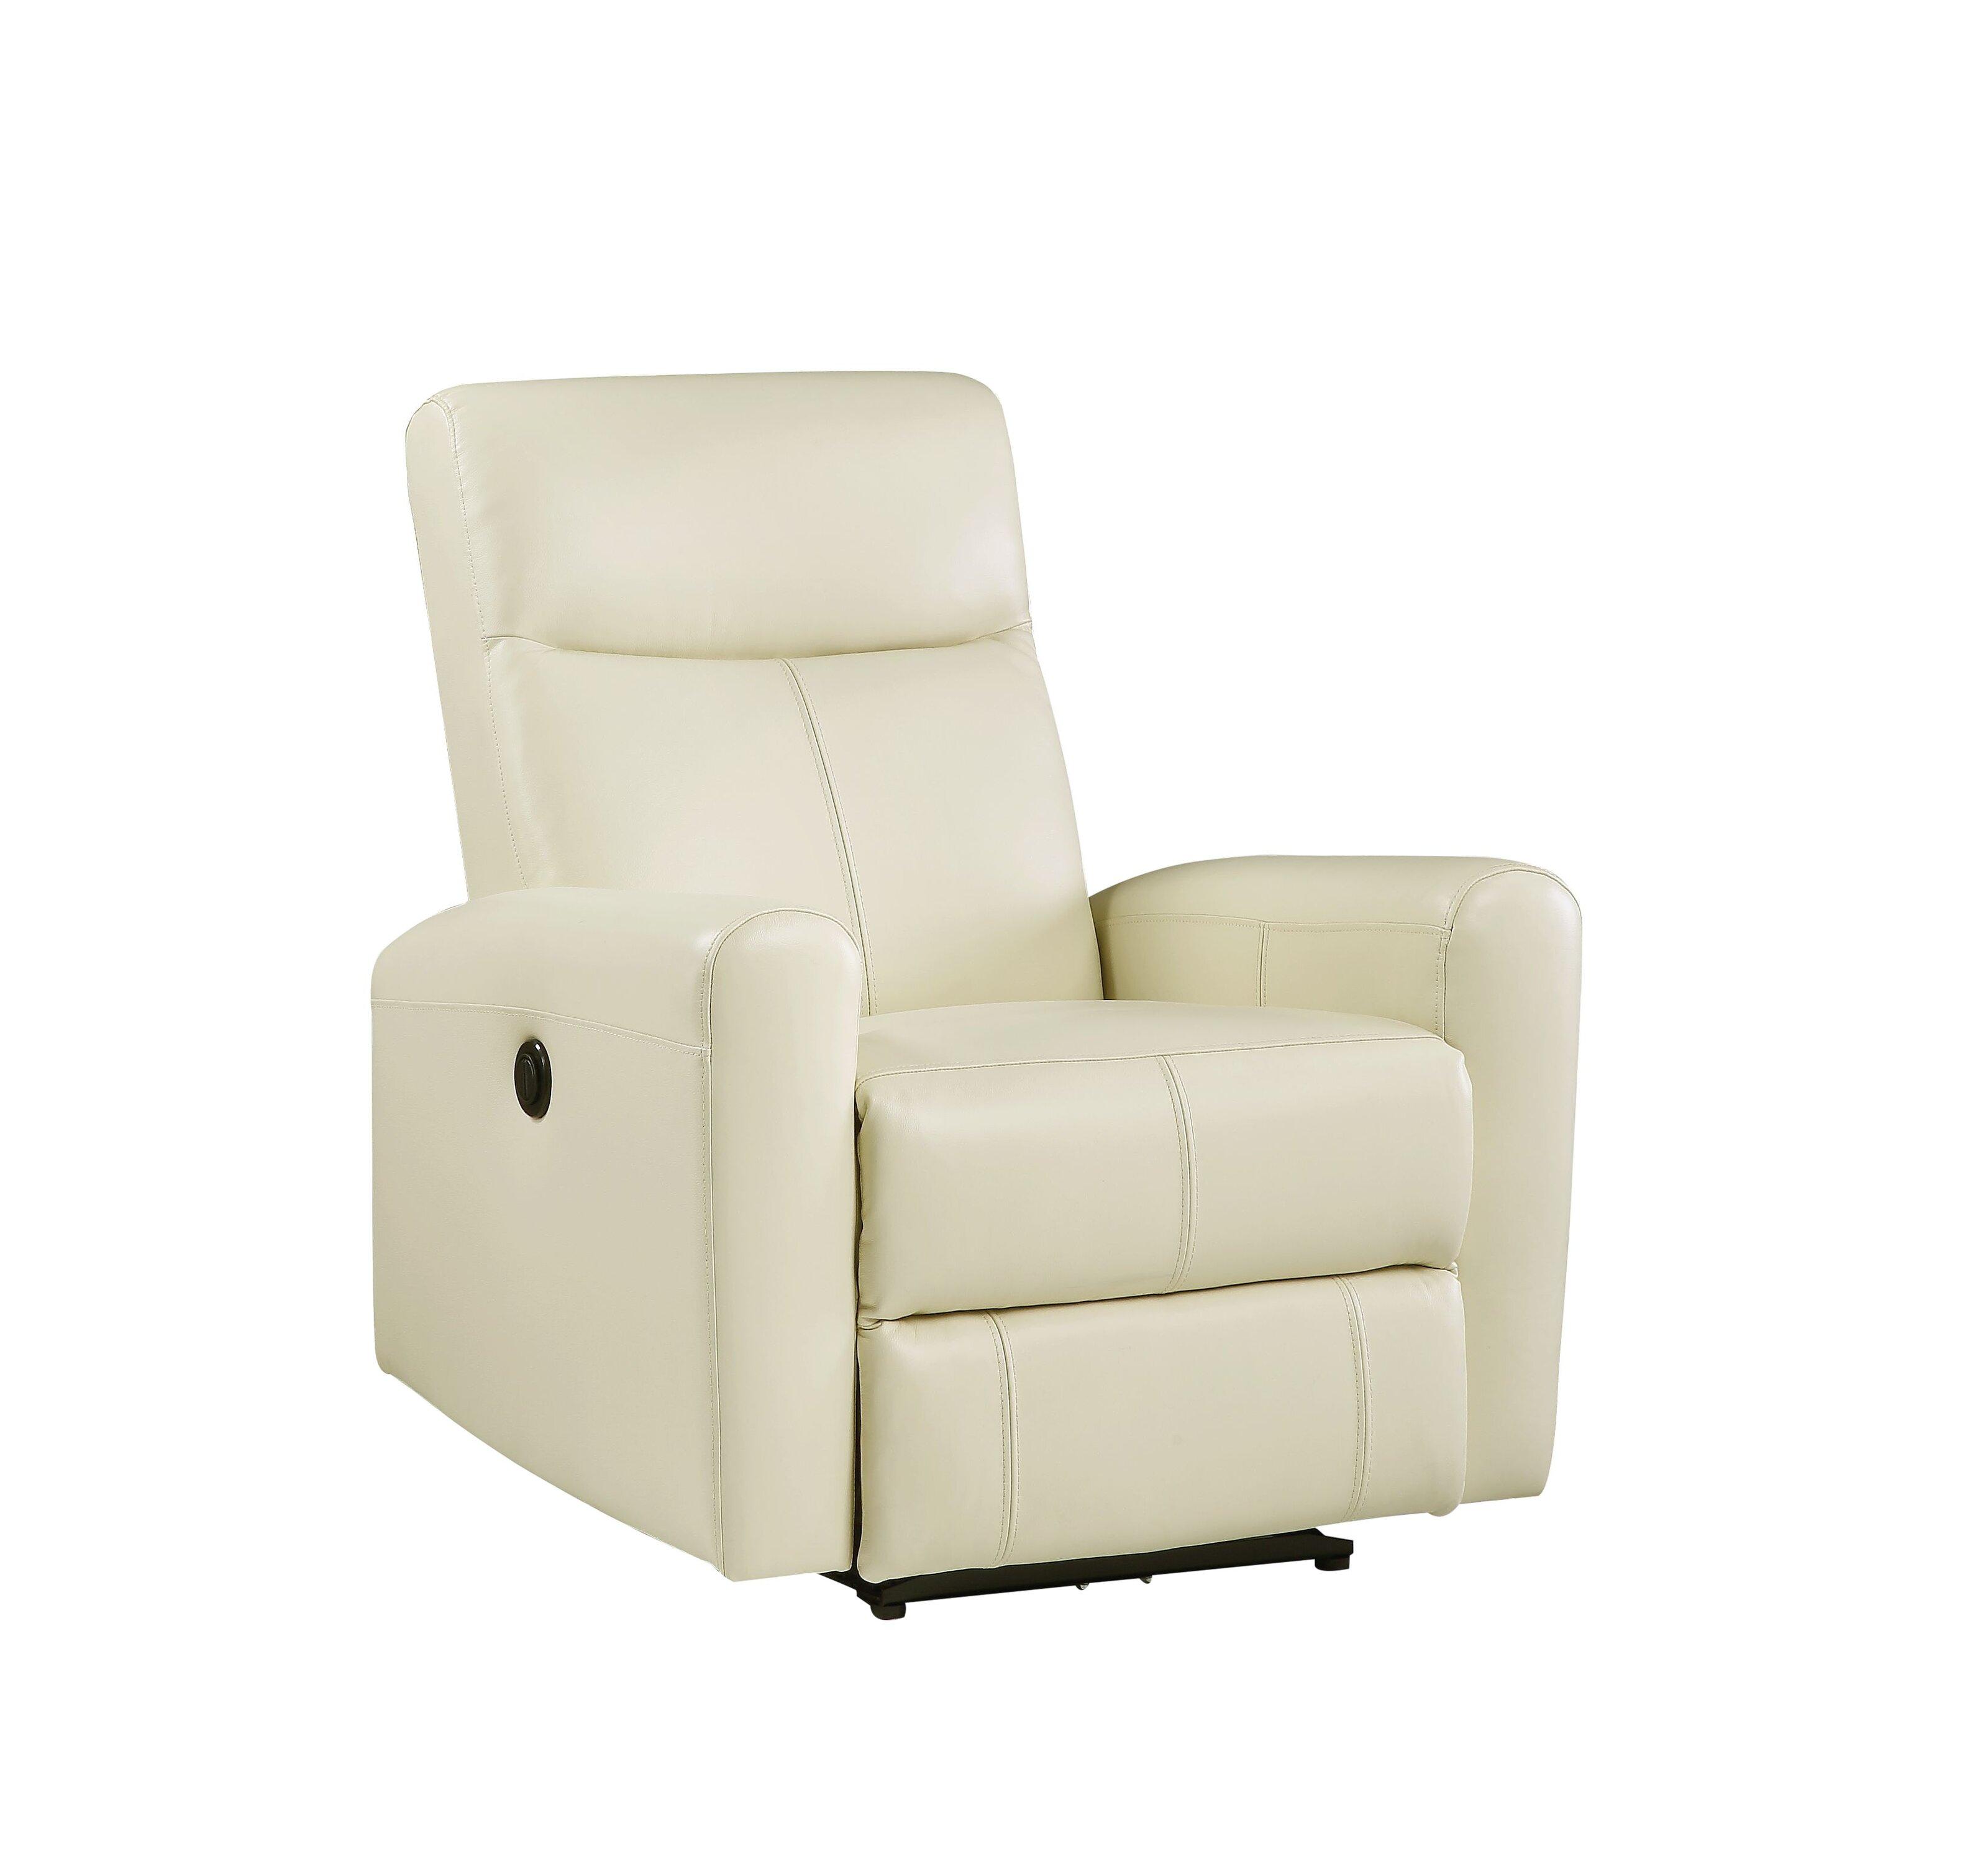 Contemporary Recliner Blane 59772 in Beige Top grain leather